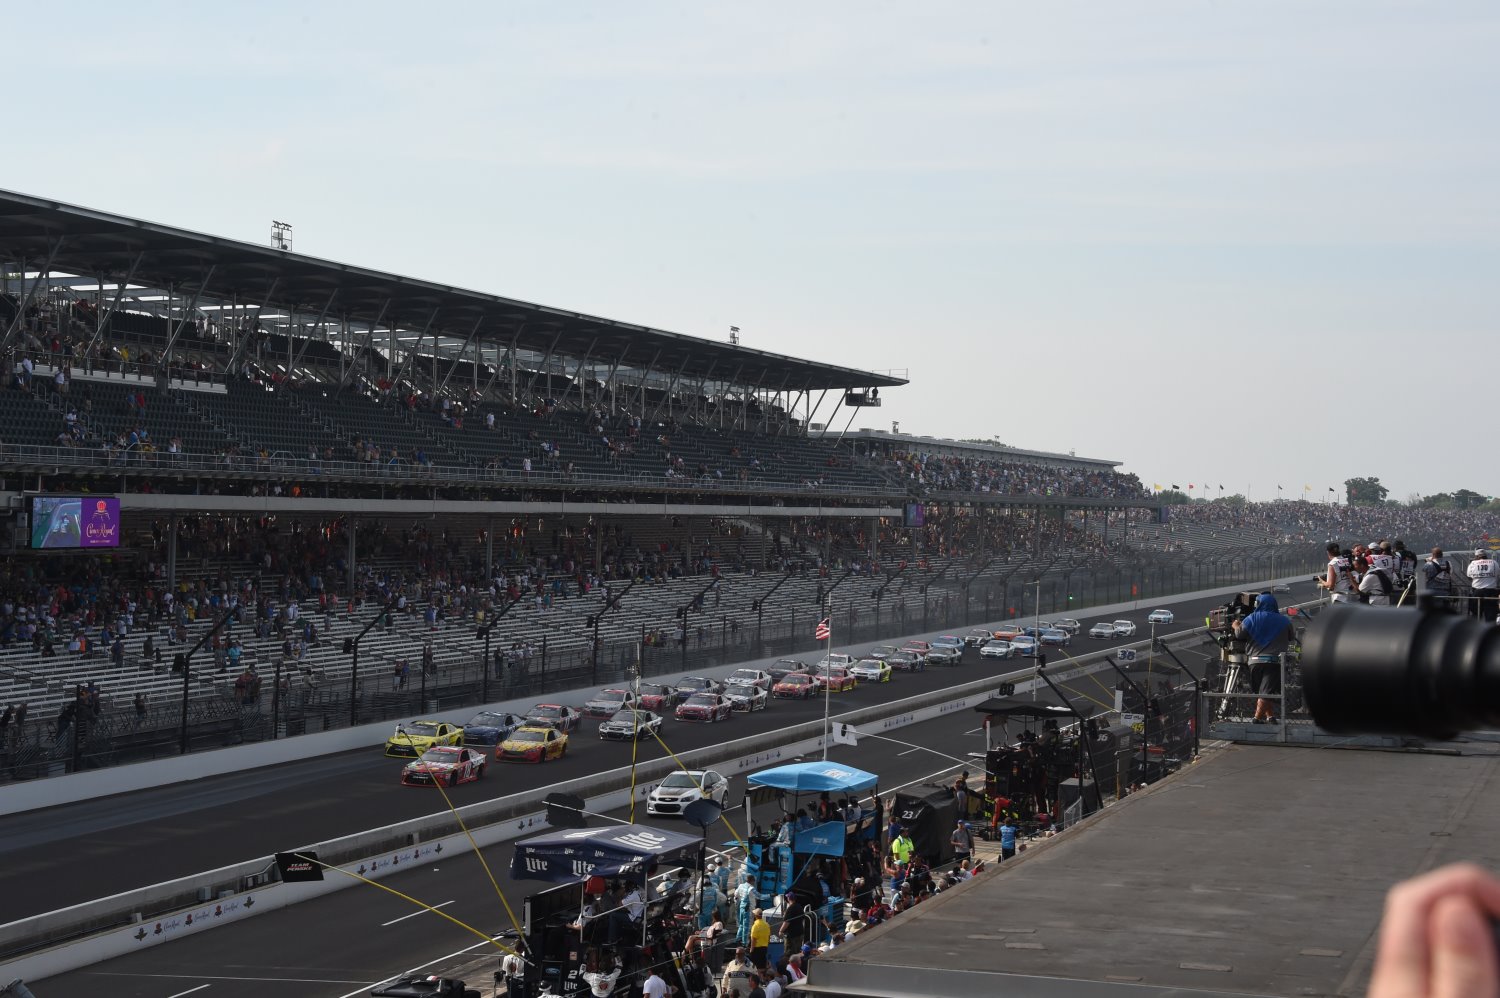 The grandstands will be even more empty